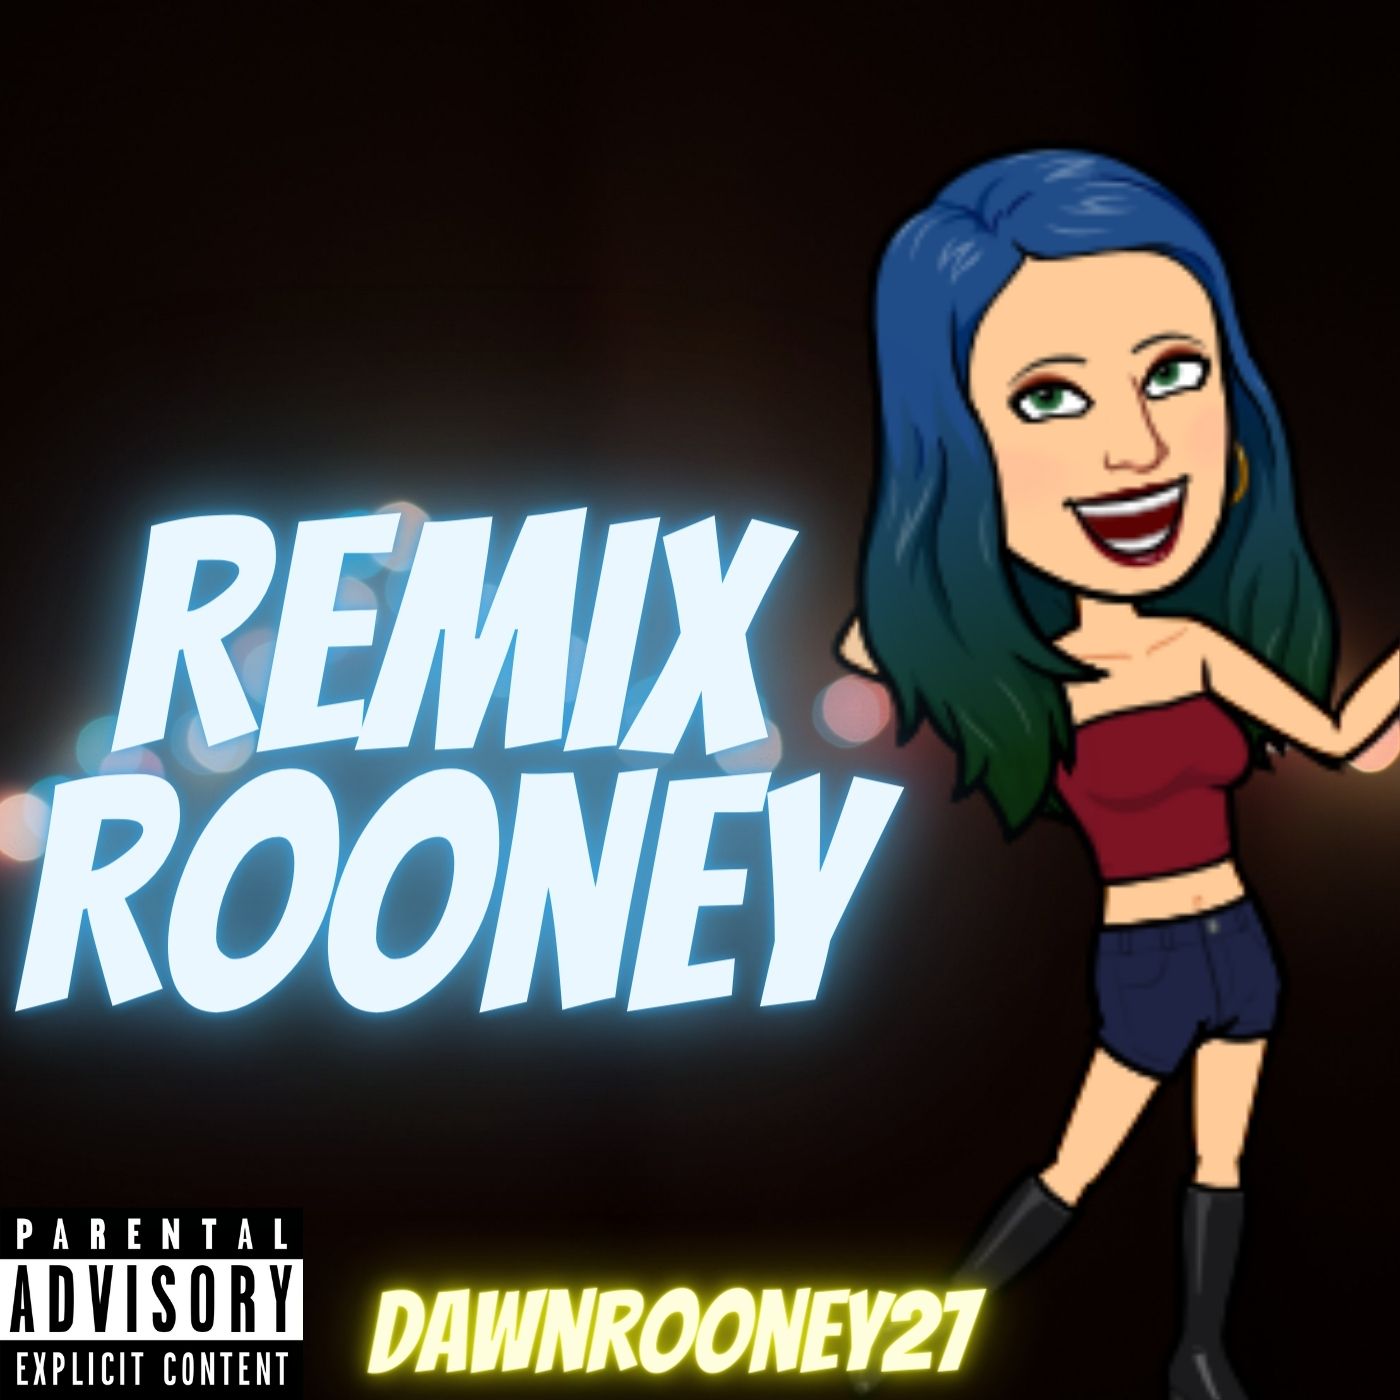 DawnRooney27, Debby Ryan, & Larray featuring Chad Hively & Chase Ryan — We Canceled Right cover artwork